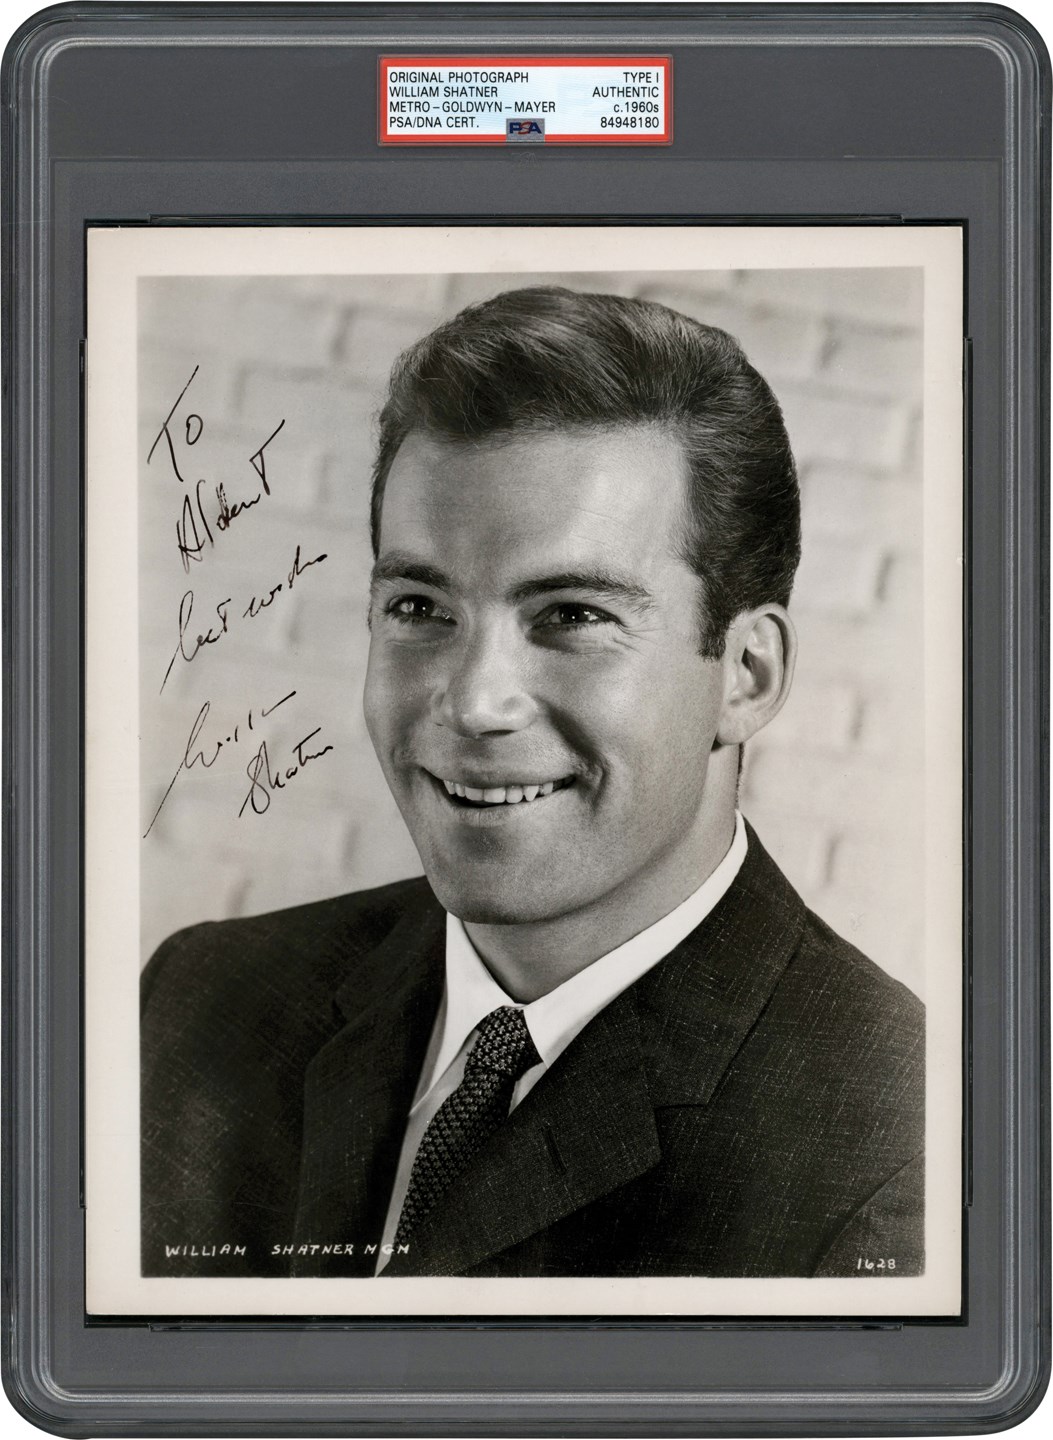 Rock And Pop Culture - Circa 1959 Early William Shatner Signed Photograph (PSA Type I)